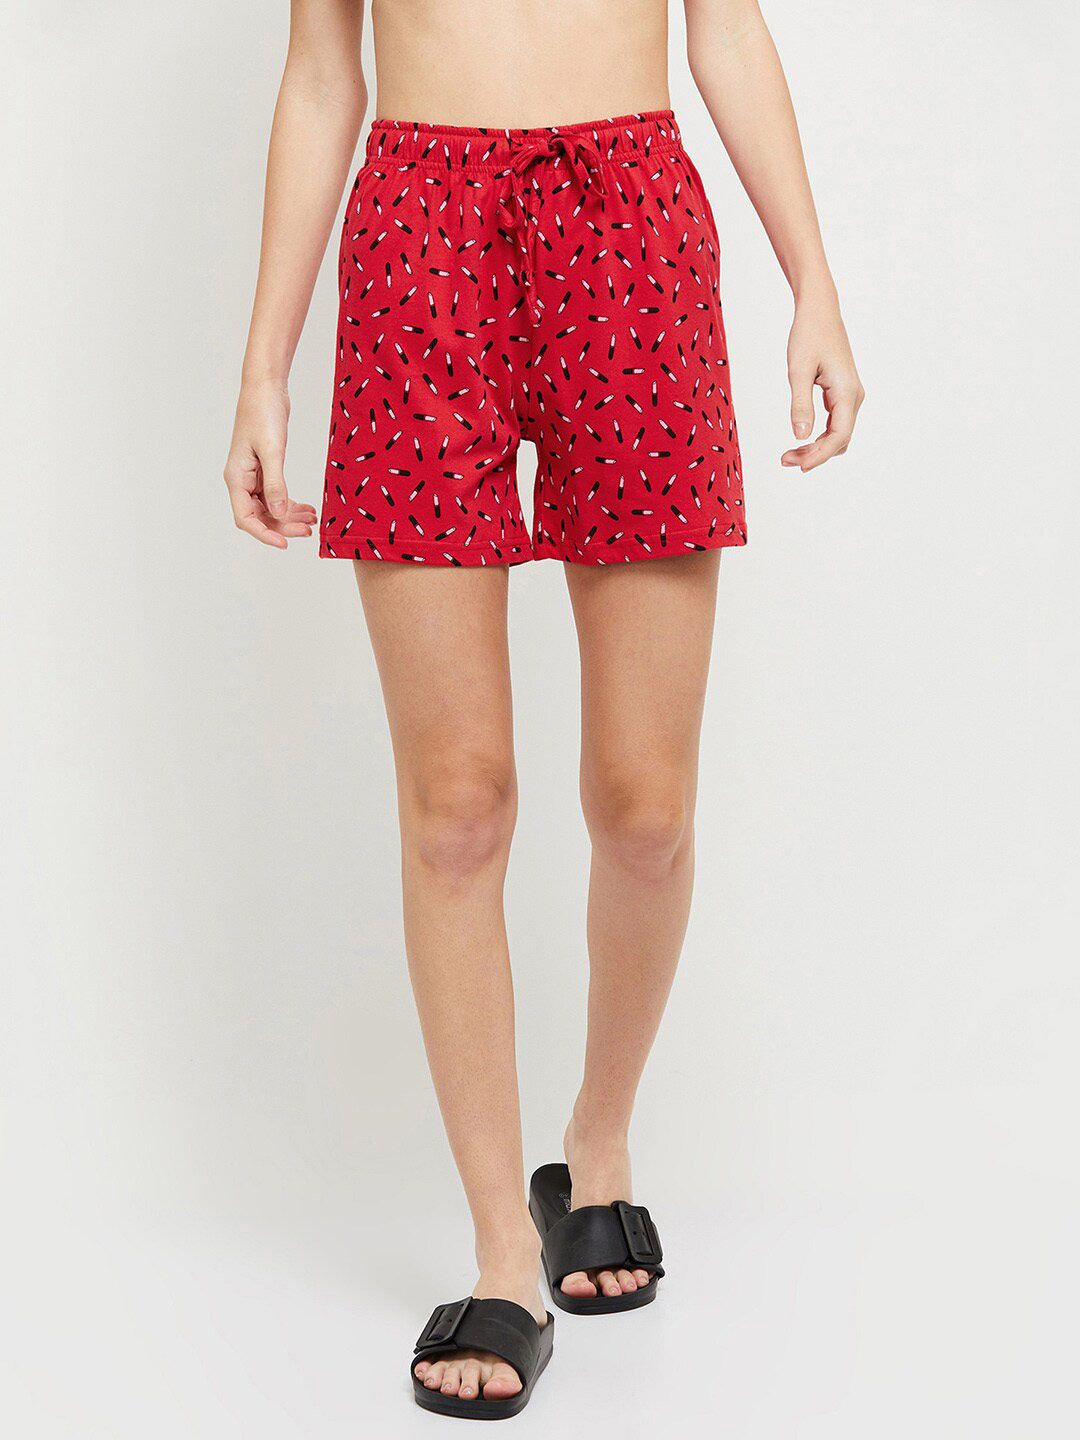 max Women Red & Black Printed Lounge Shorts Price in India